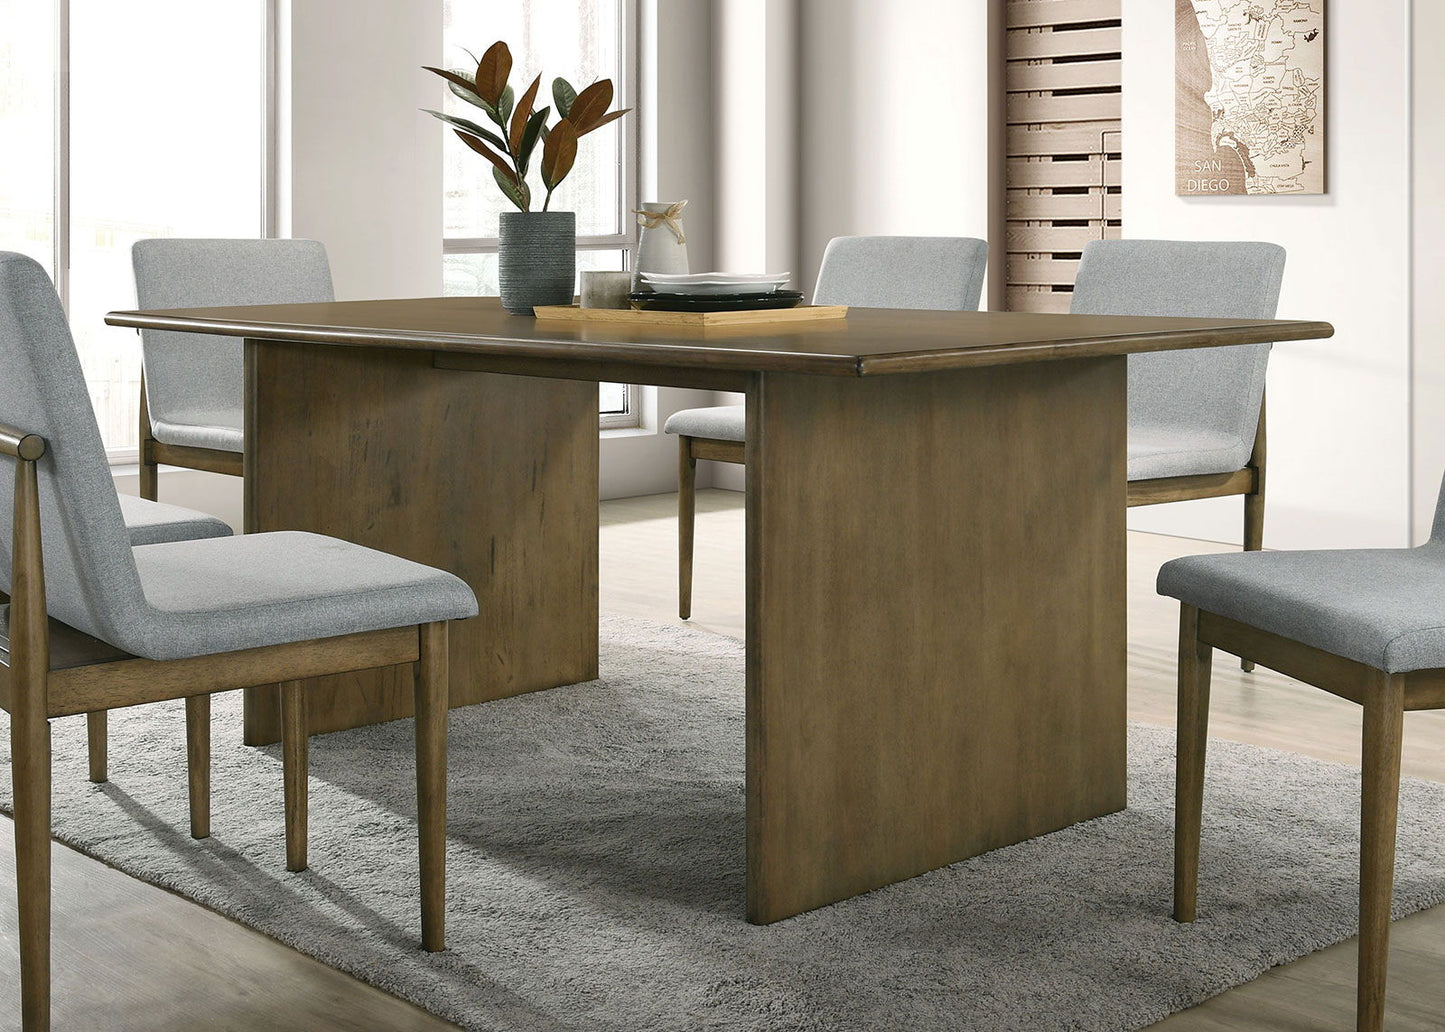 St Gallen - Dining Table - Natural Tone